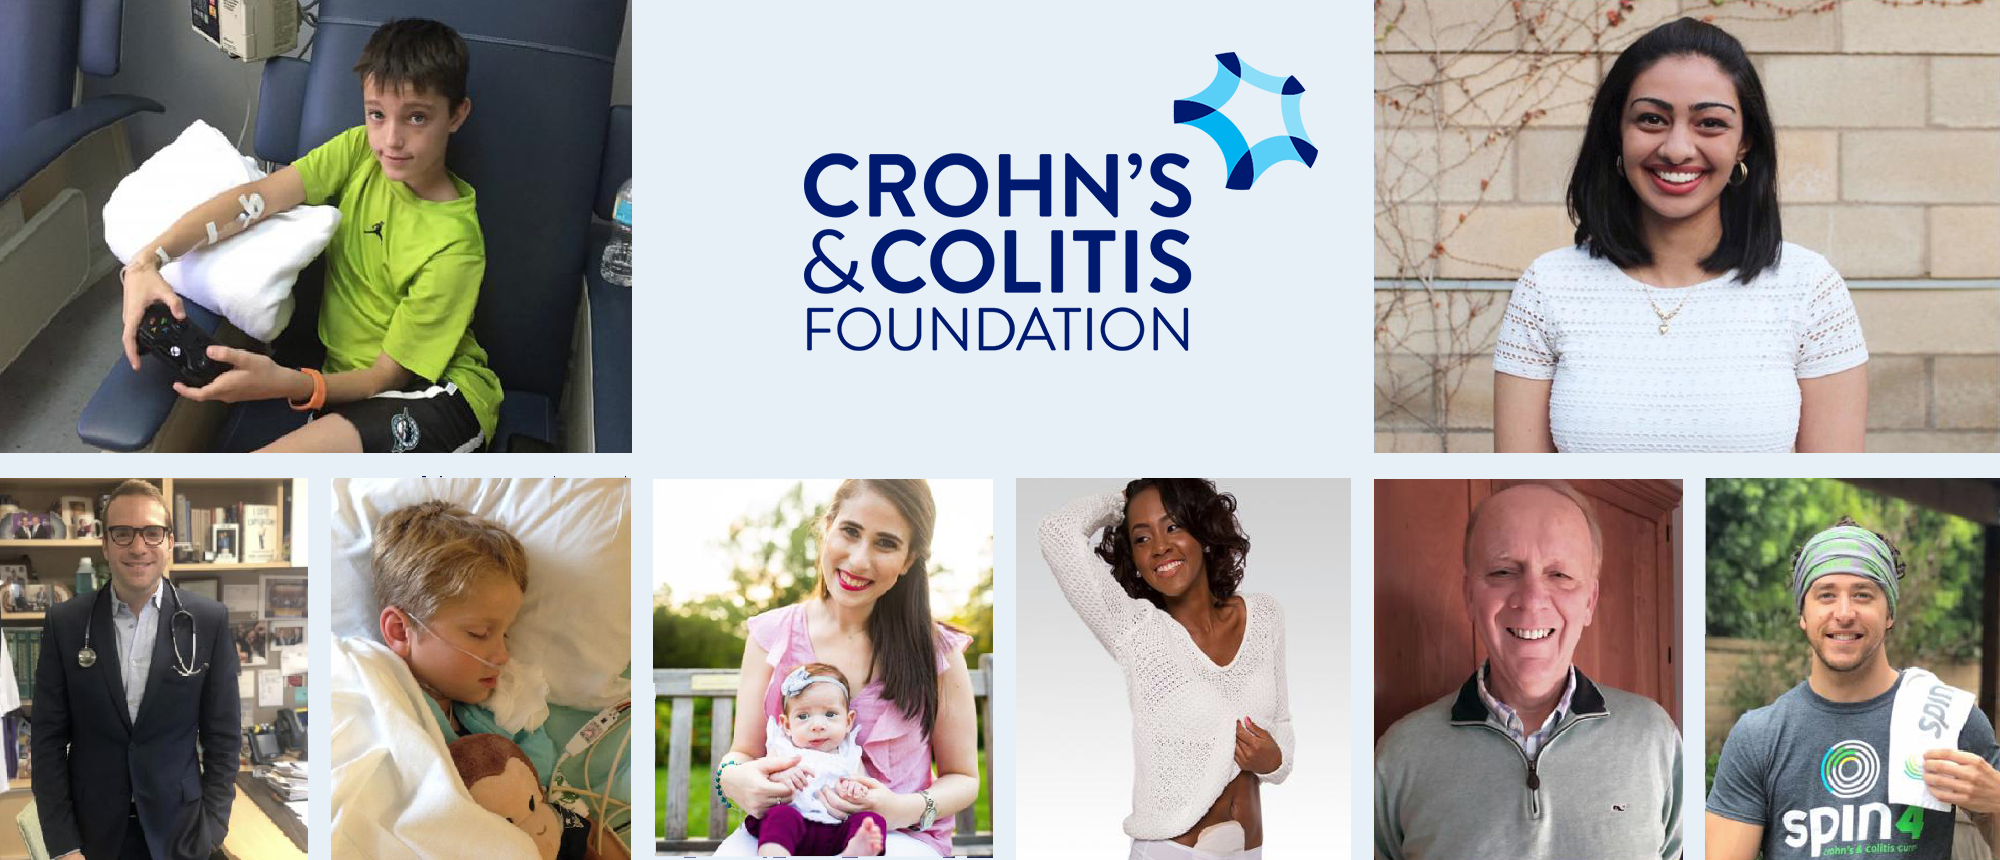 Banner featuring Crohn's and Colitis Foundation's logo and constituents.